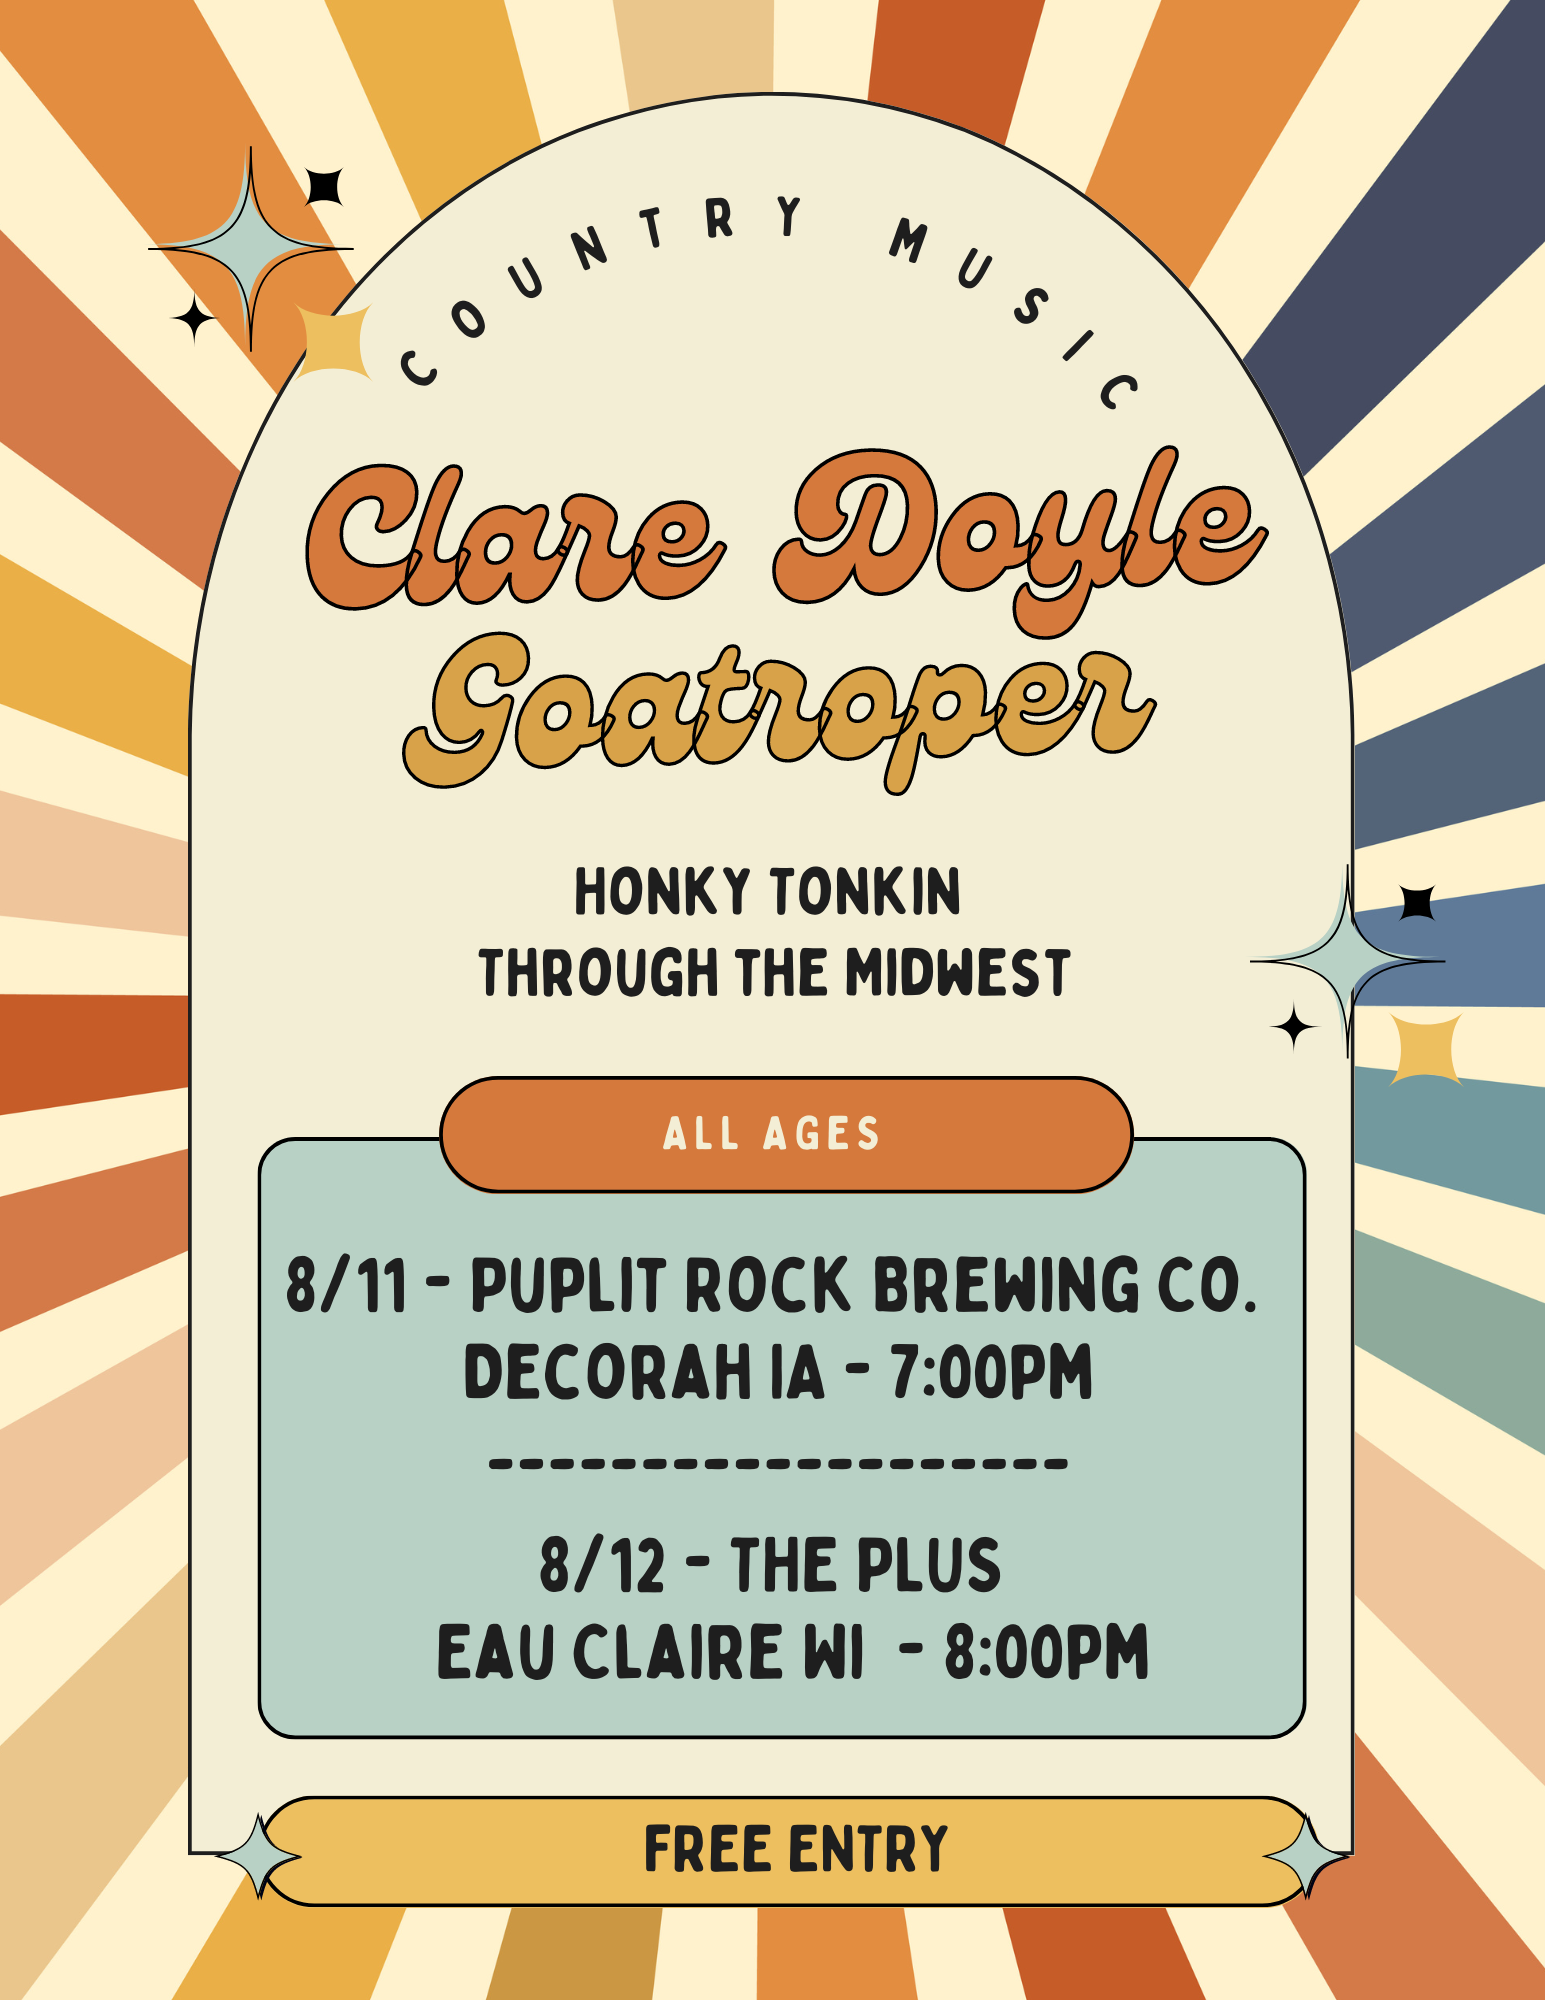 Pulpit Rock Brewing Co. Presents: Clare Doyle and Goatroper thumbnail